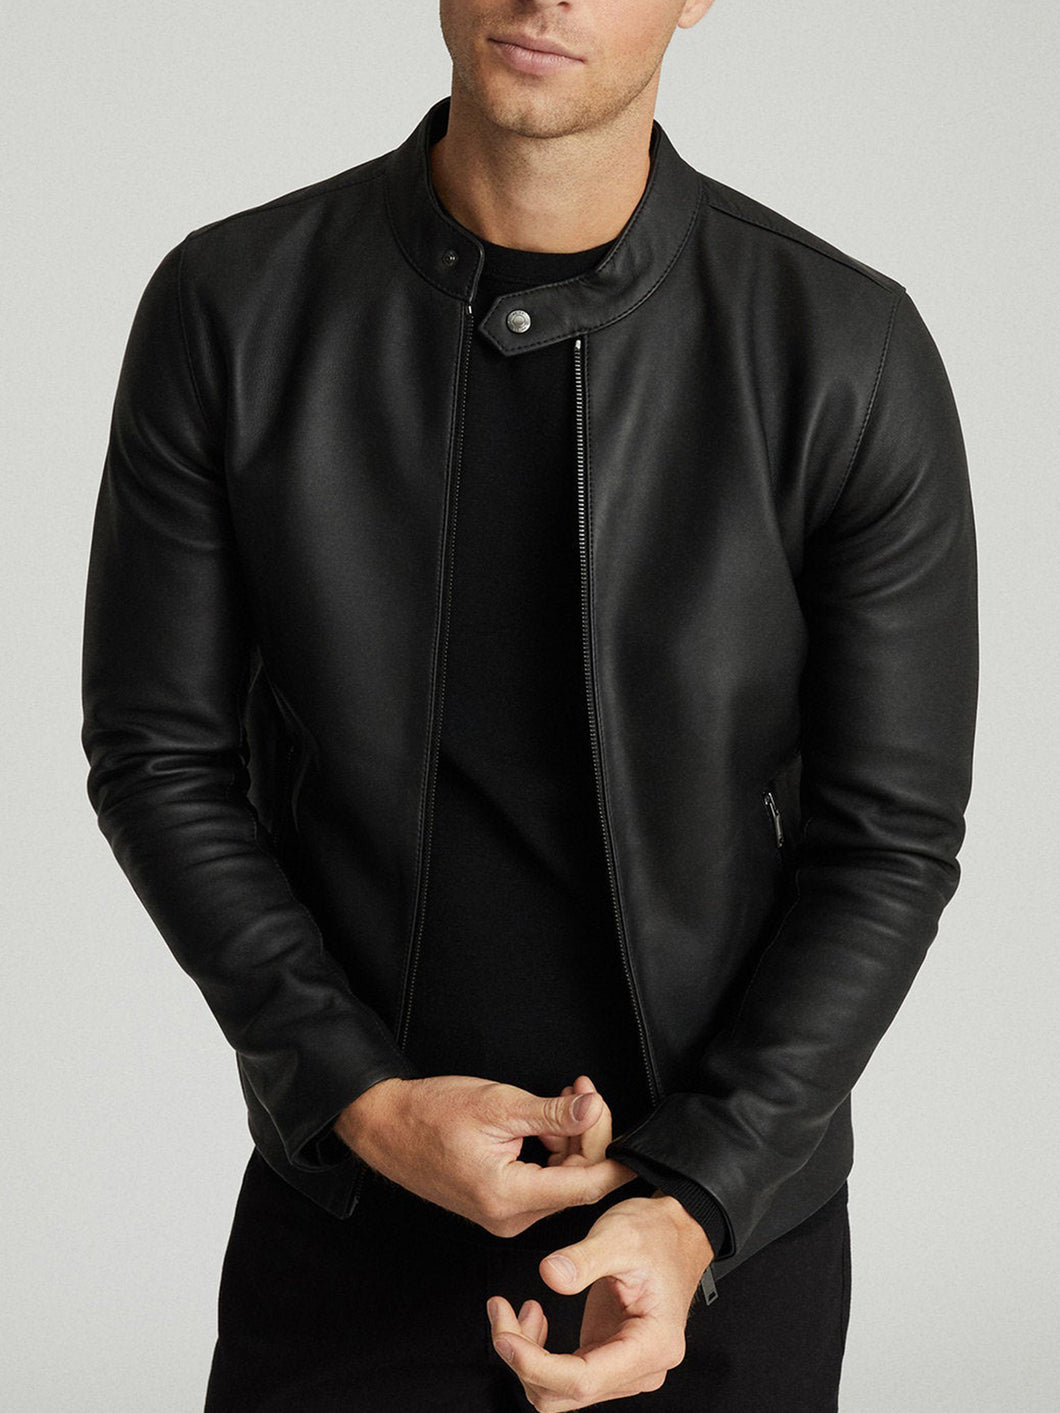 Mens Slim Fit Black Leather Jacket With Snap Button Collar